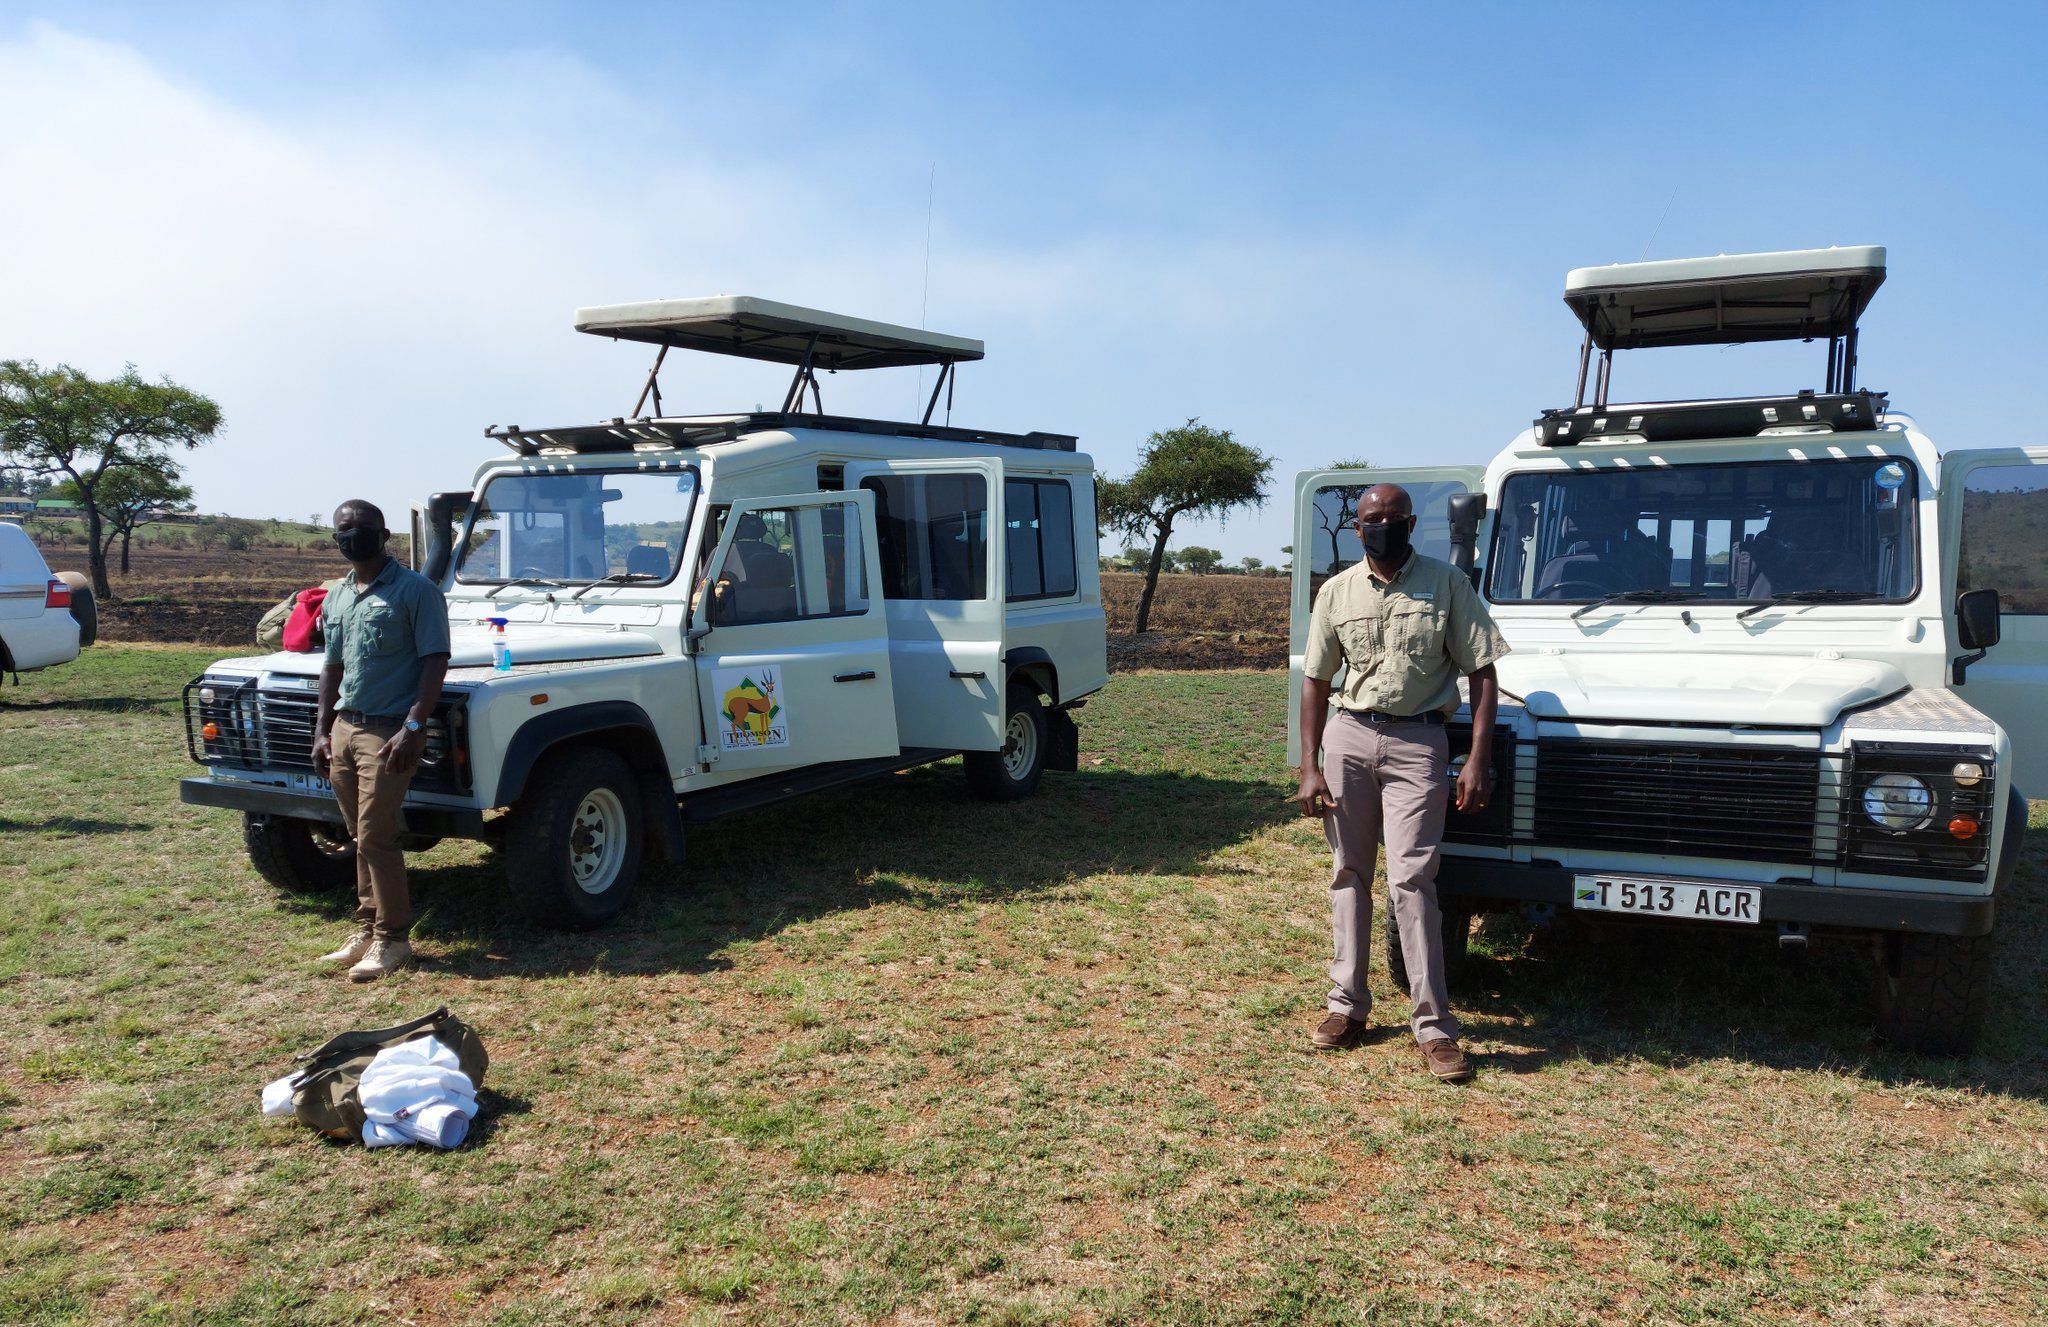 thomson guides airport transfer in serengeti